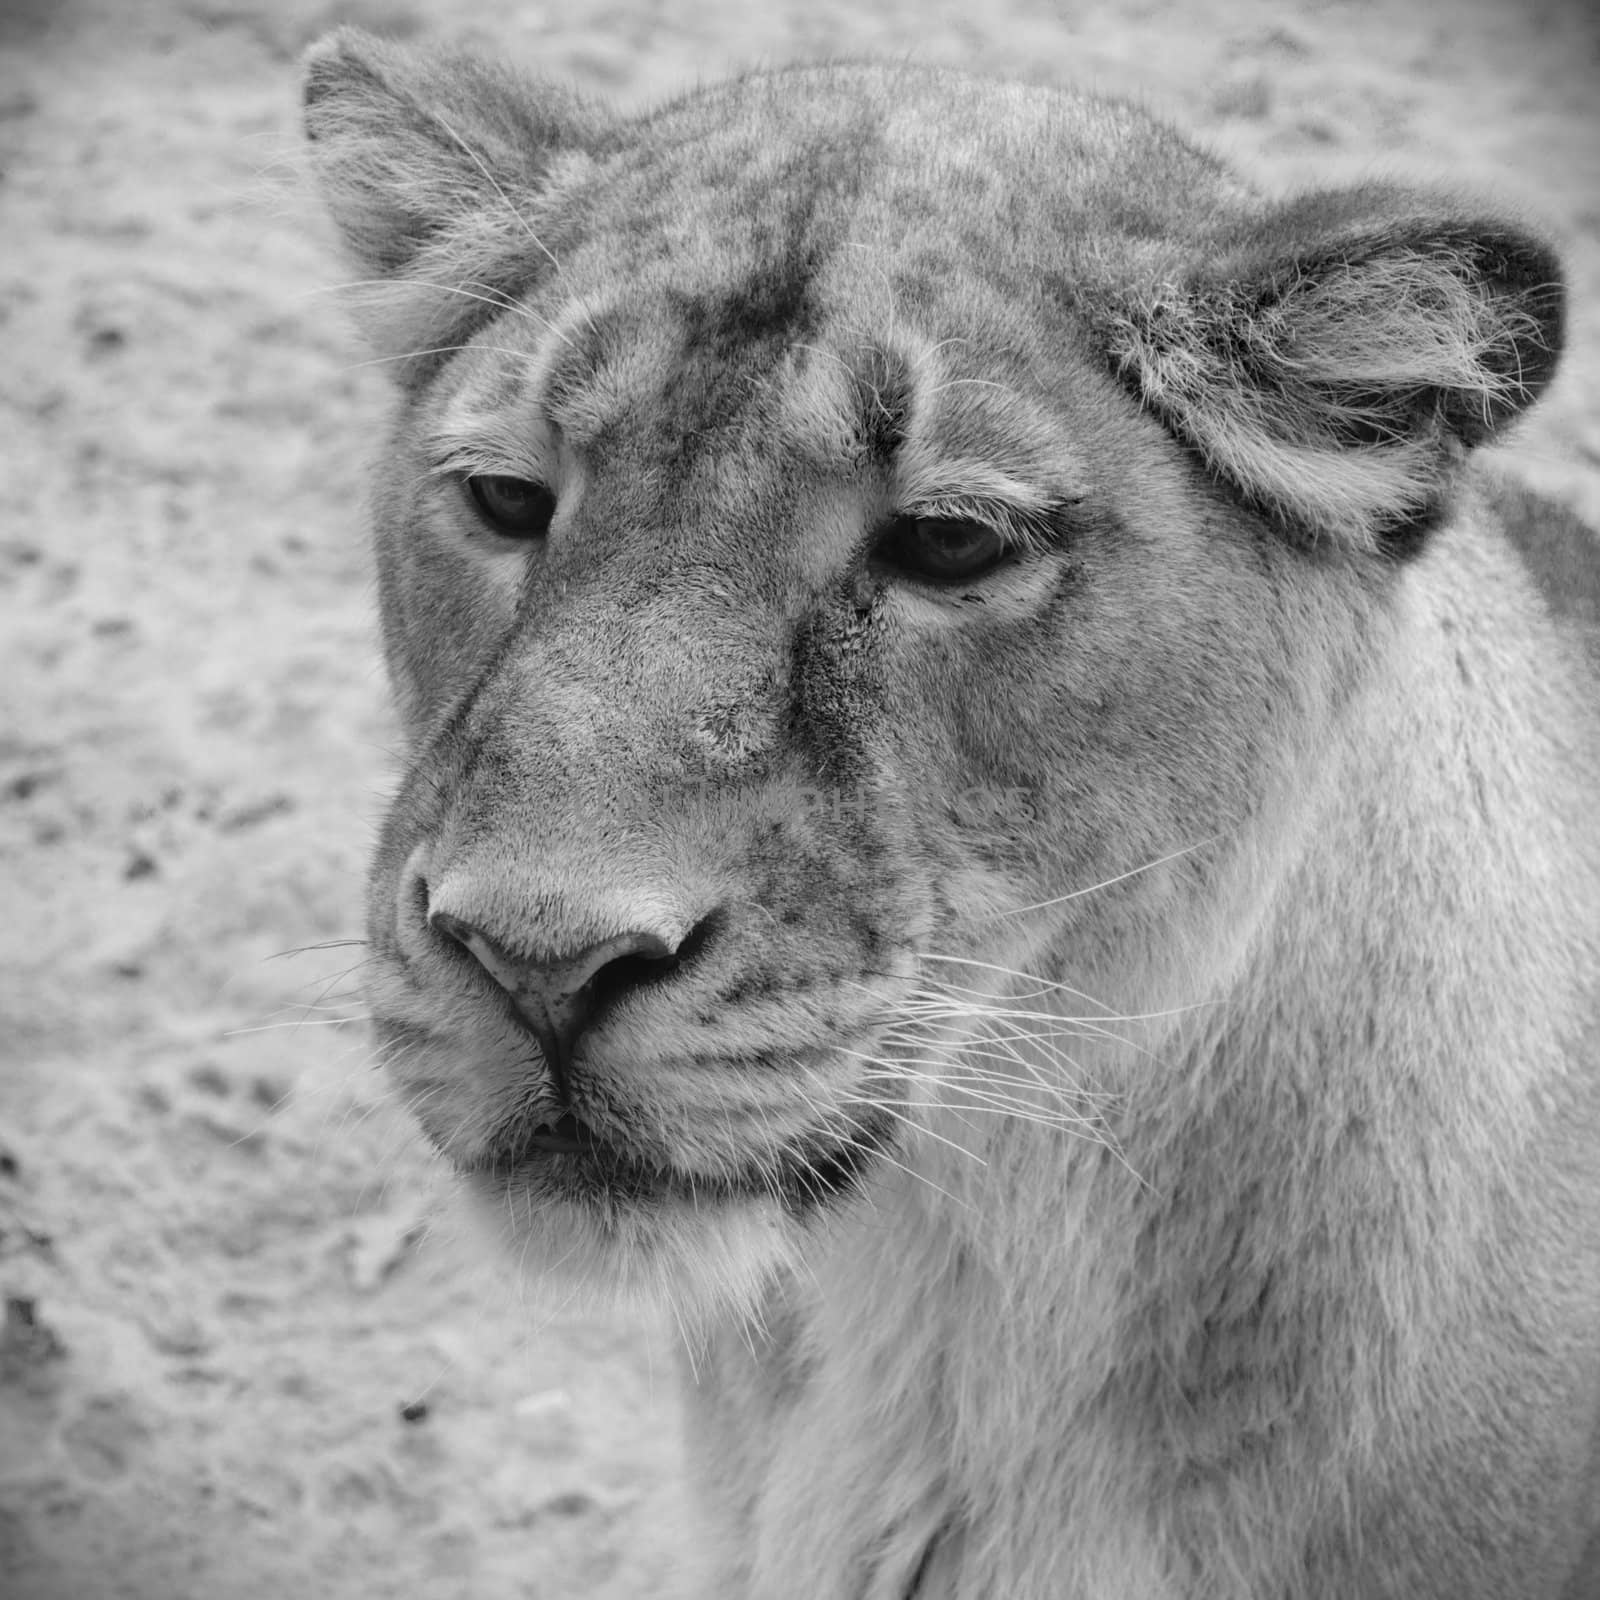 lioness by mihail1981